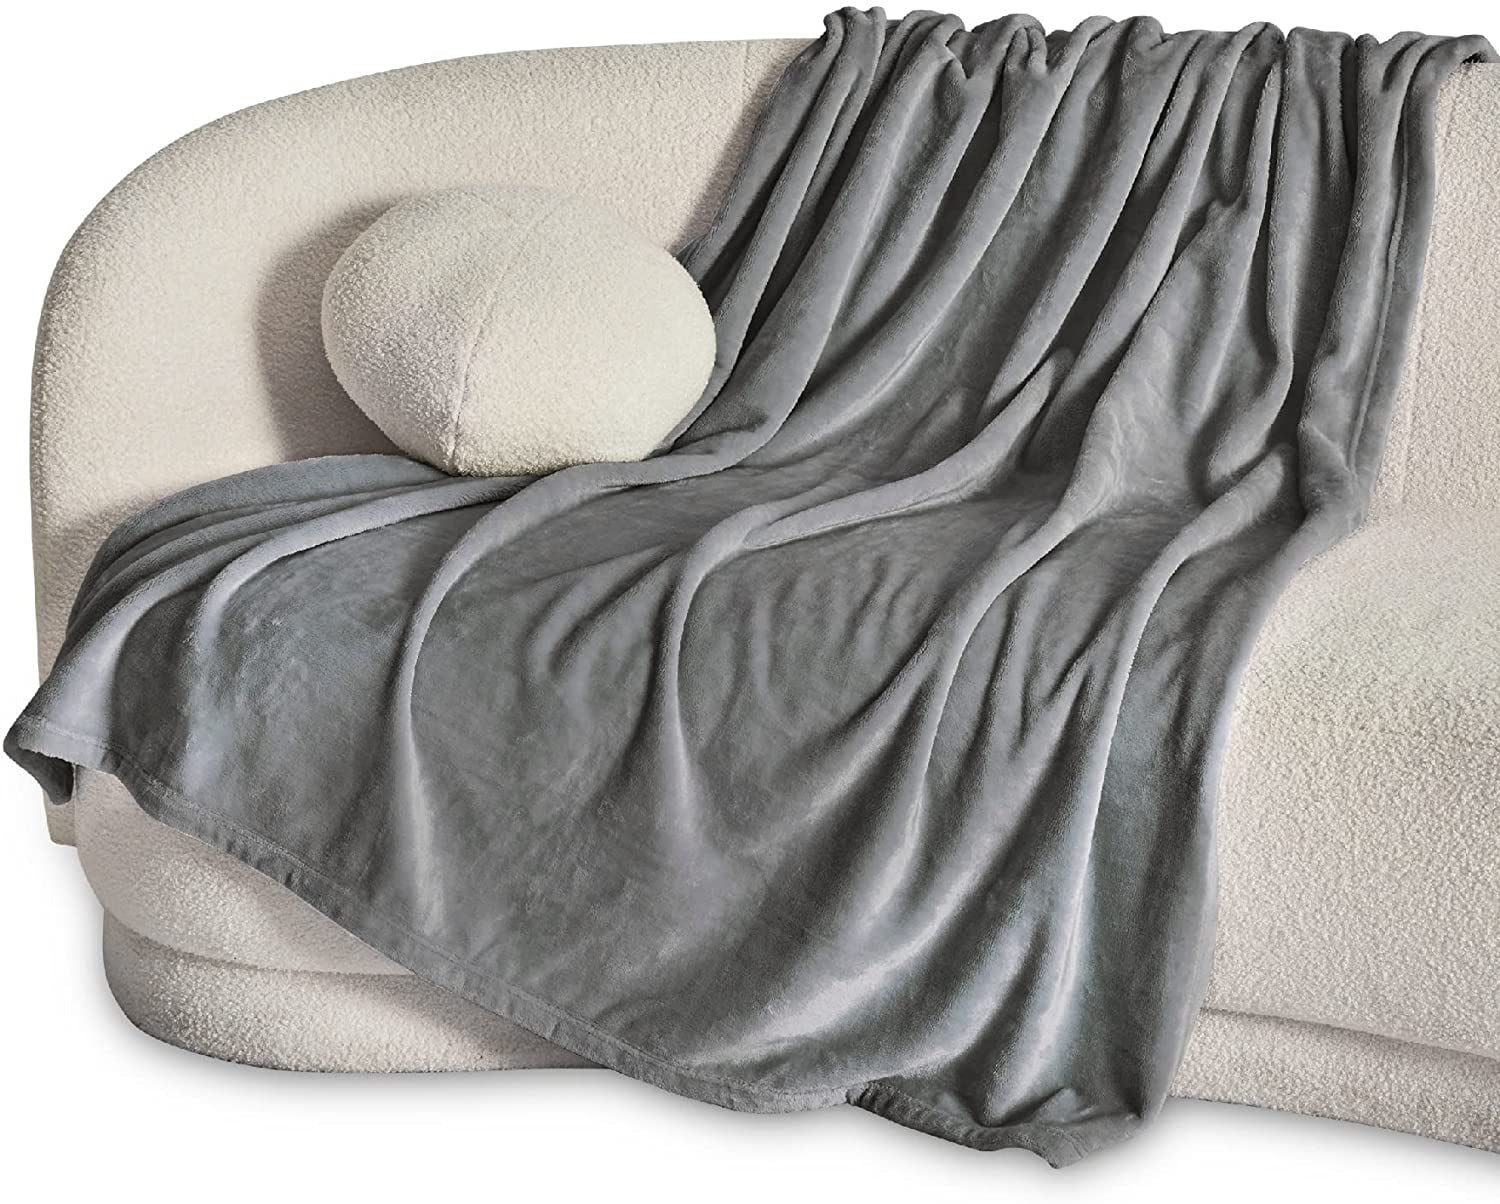 Bedsure Fleece Throw Blanket for Couch Grey - Lightweight Plush Fuzzy Cozy  Soft Blankets and Throws for Sofa, 50x60 inches - Walmart.com